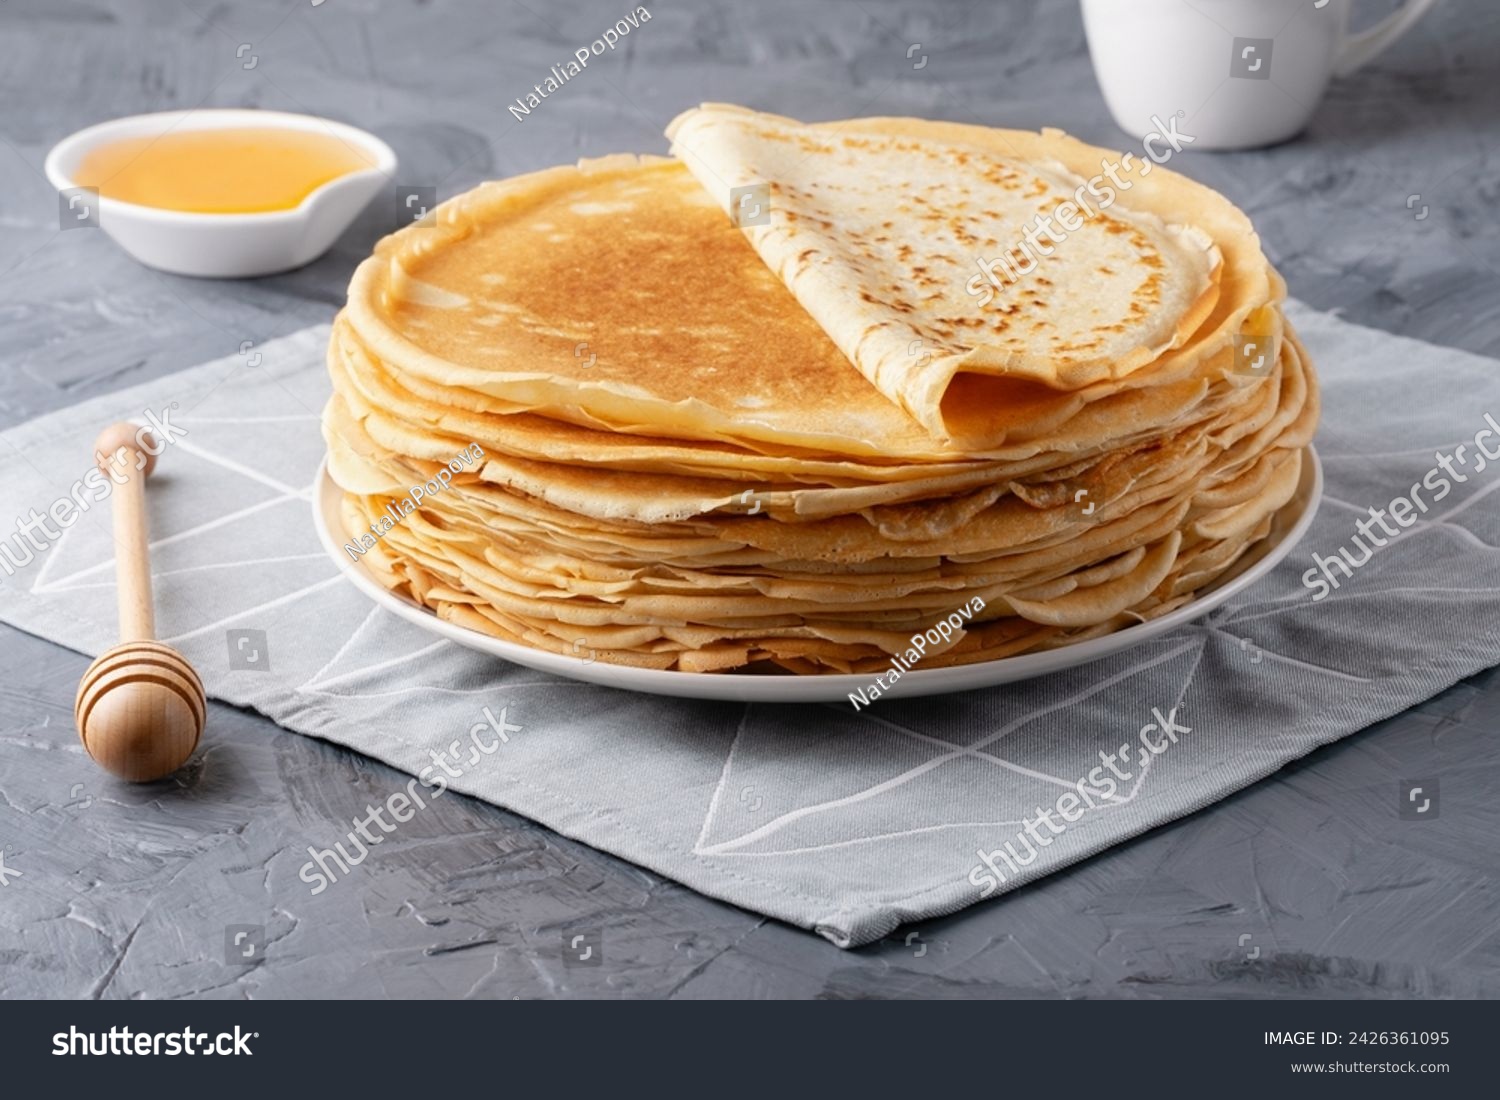 Stack of traditional russian pancakes blini on gray background with copy space. Homemade russian thin pancakes blini. Russian food, russian kitchen #2426361095